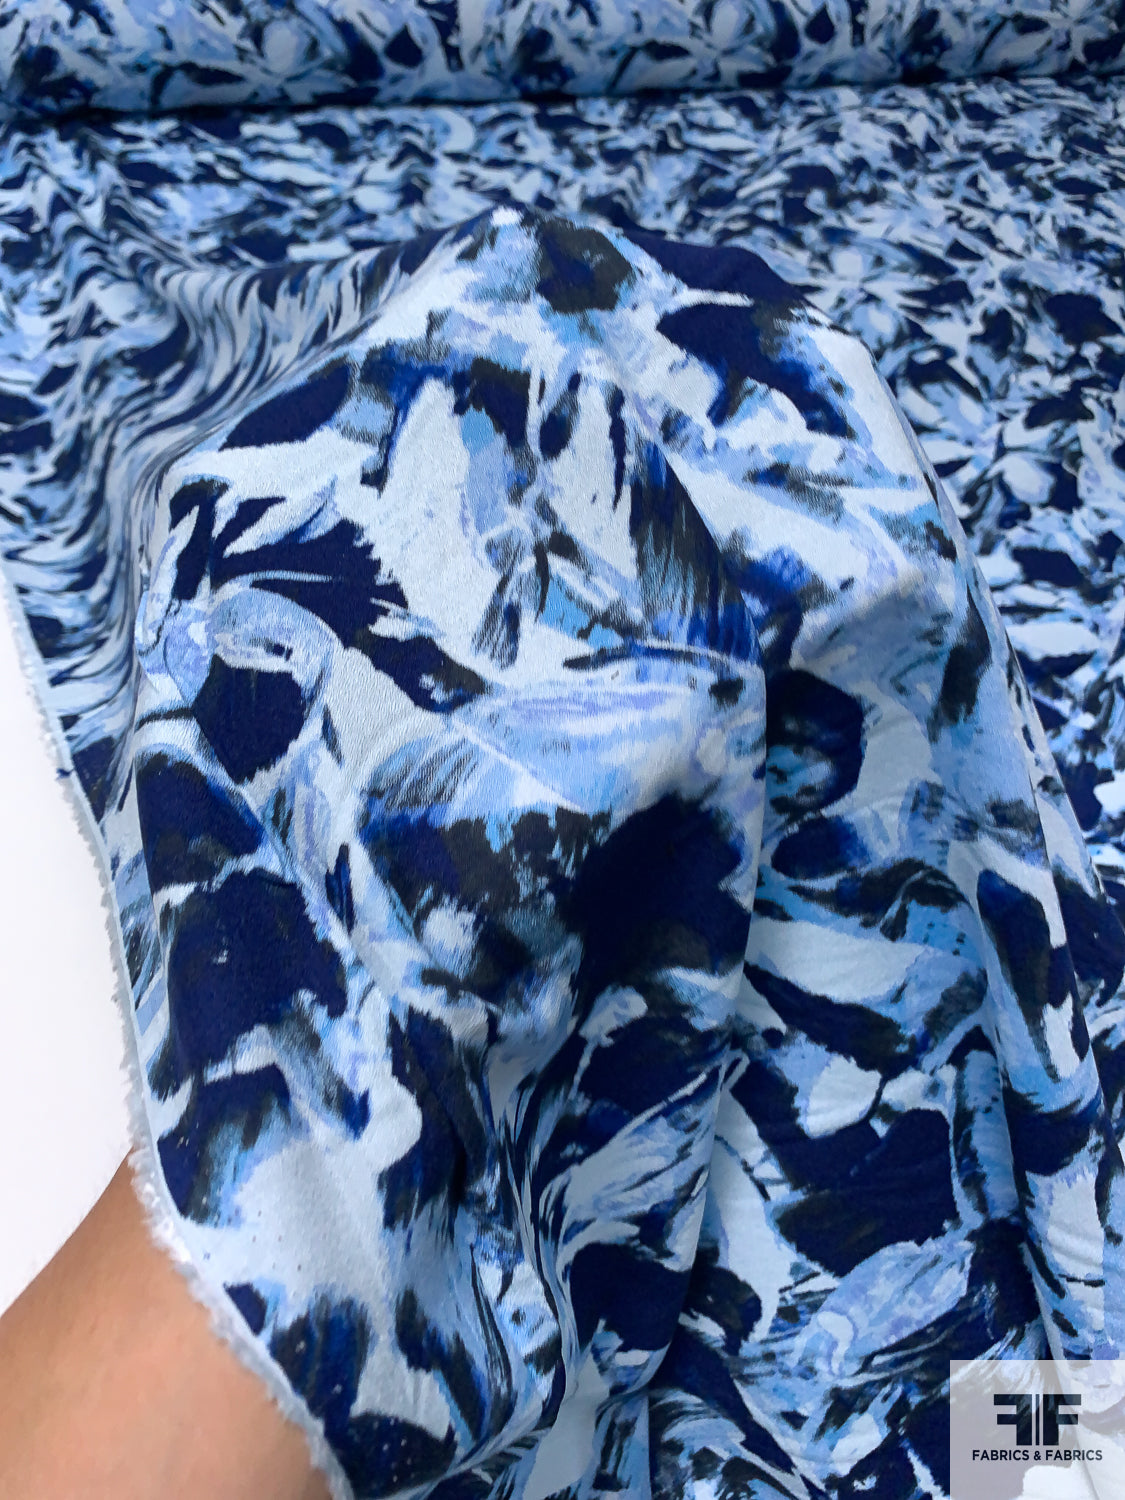 Abstract Painterly Printed Rayon Crepe - Navy / Sky Blue